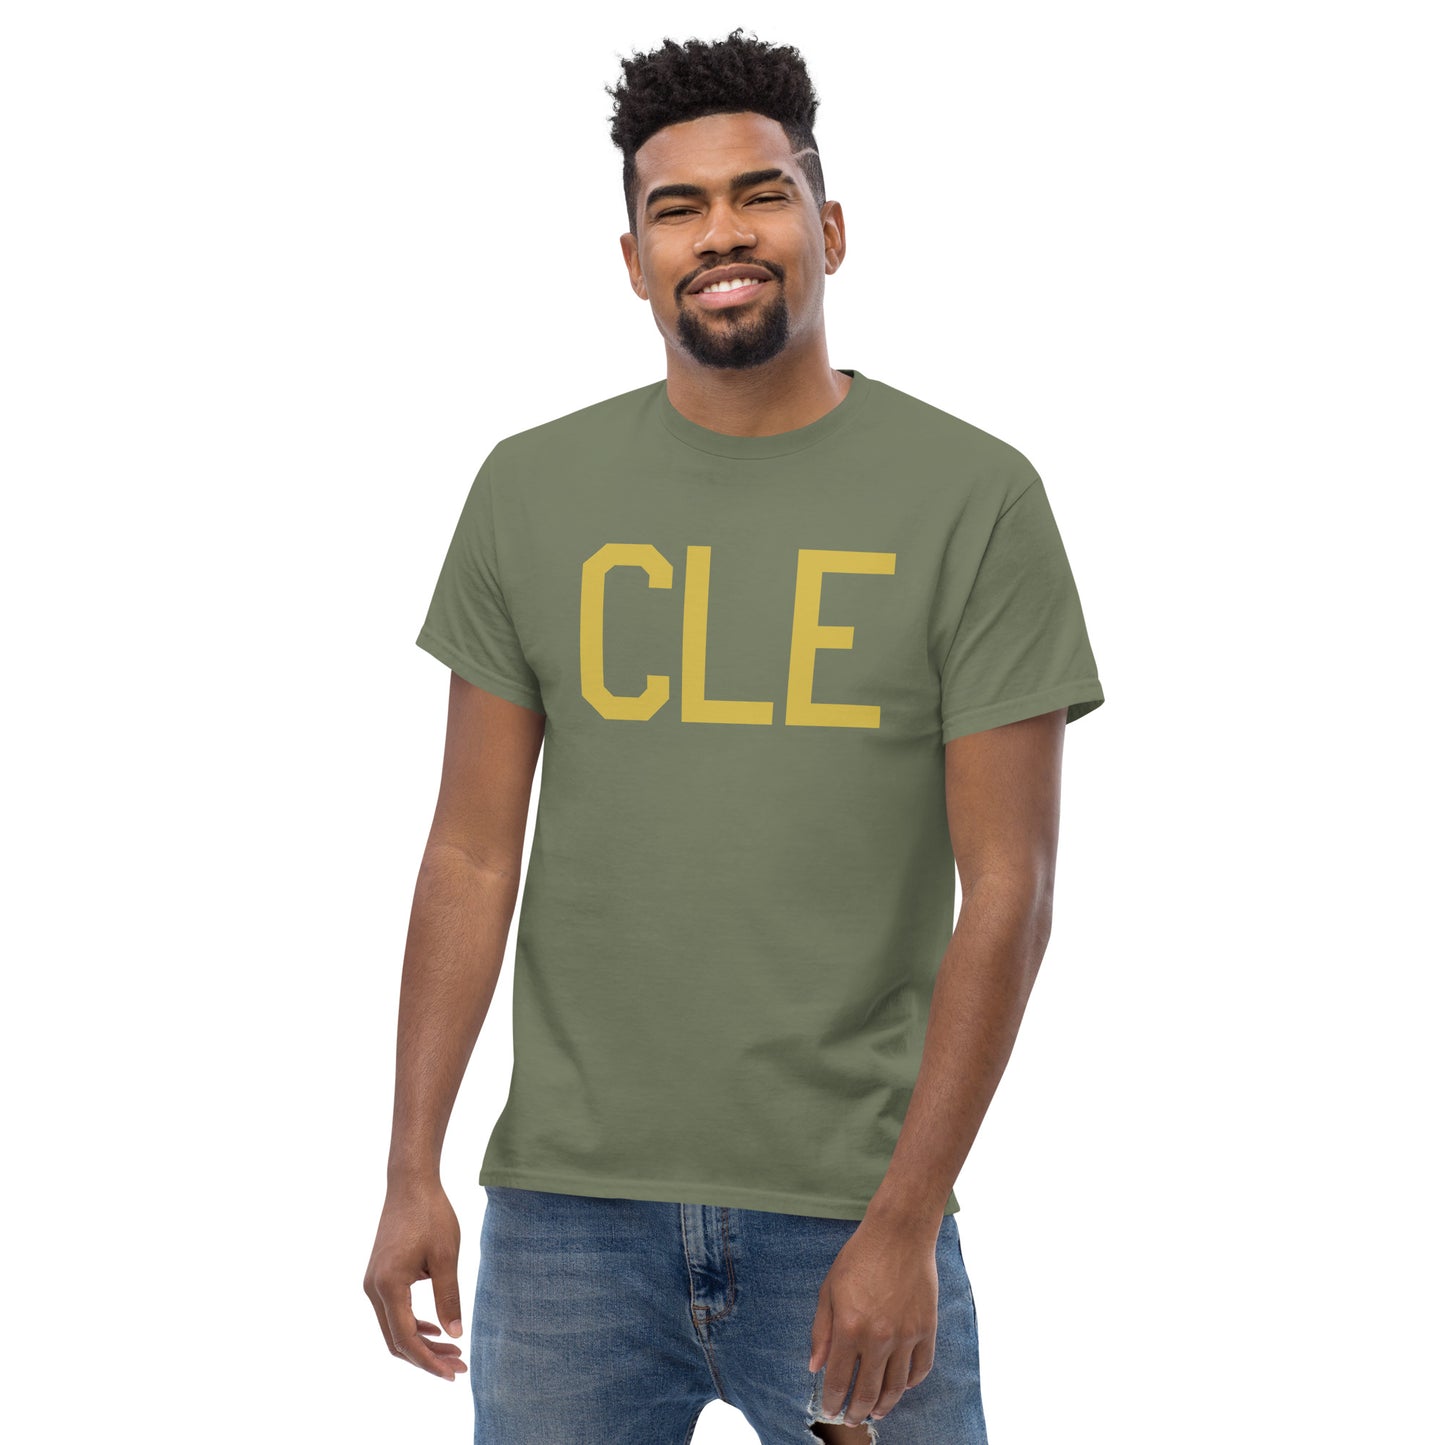 Aviation Enthusiast Men's Tee - Old Gold Graphic • CLE Cleveland • YHM Designs - Image 06